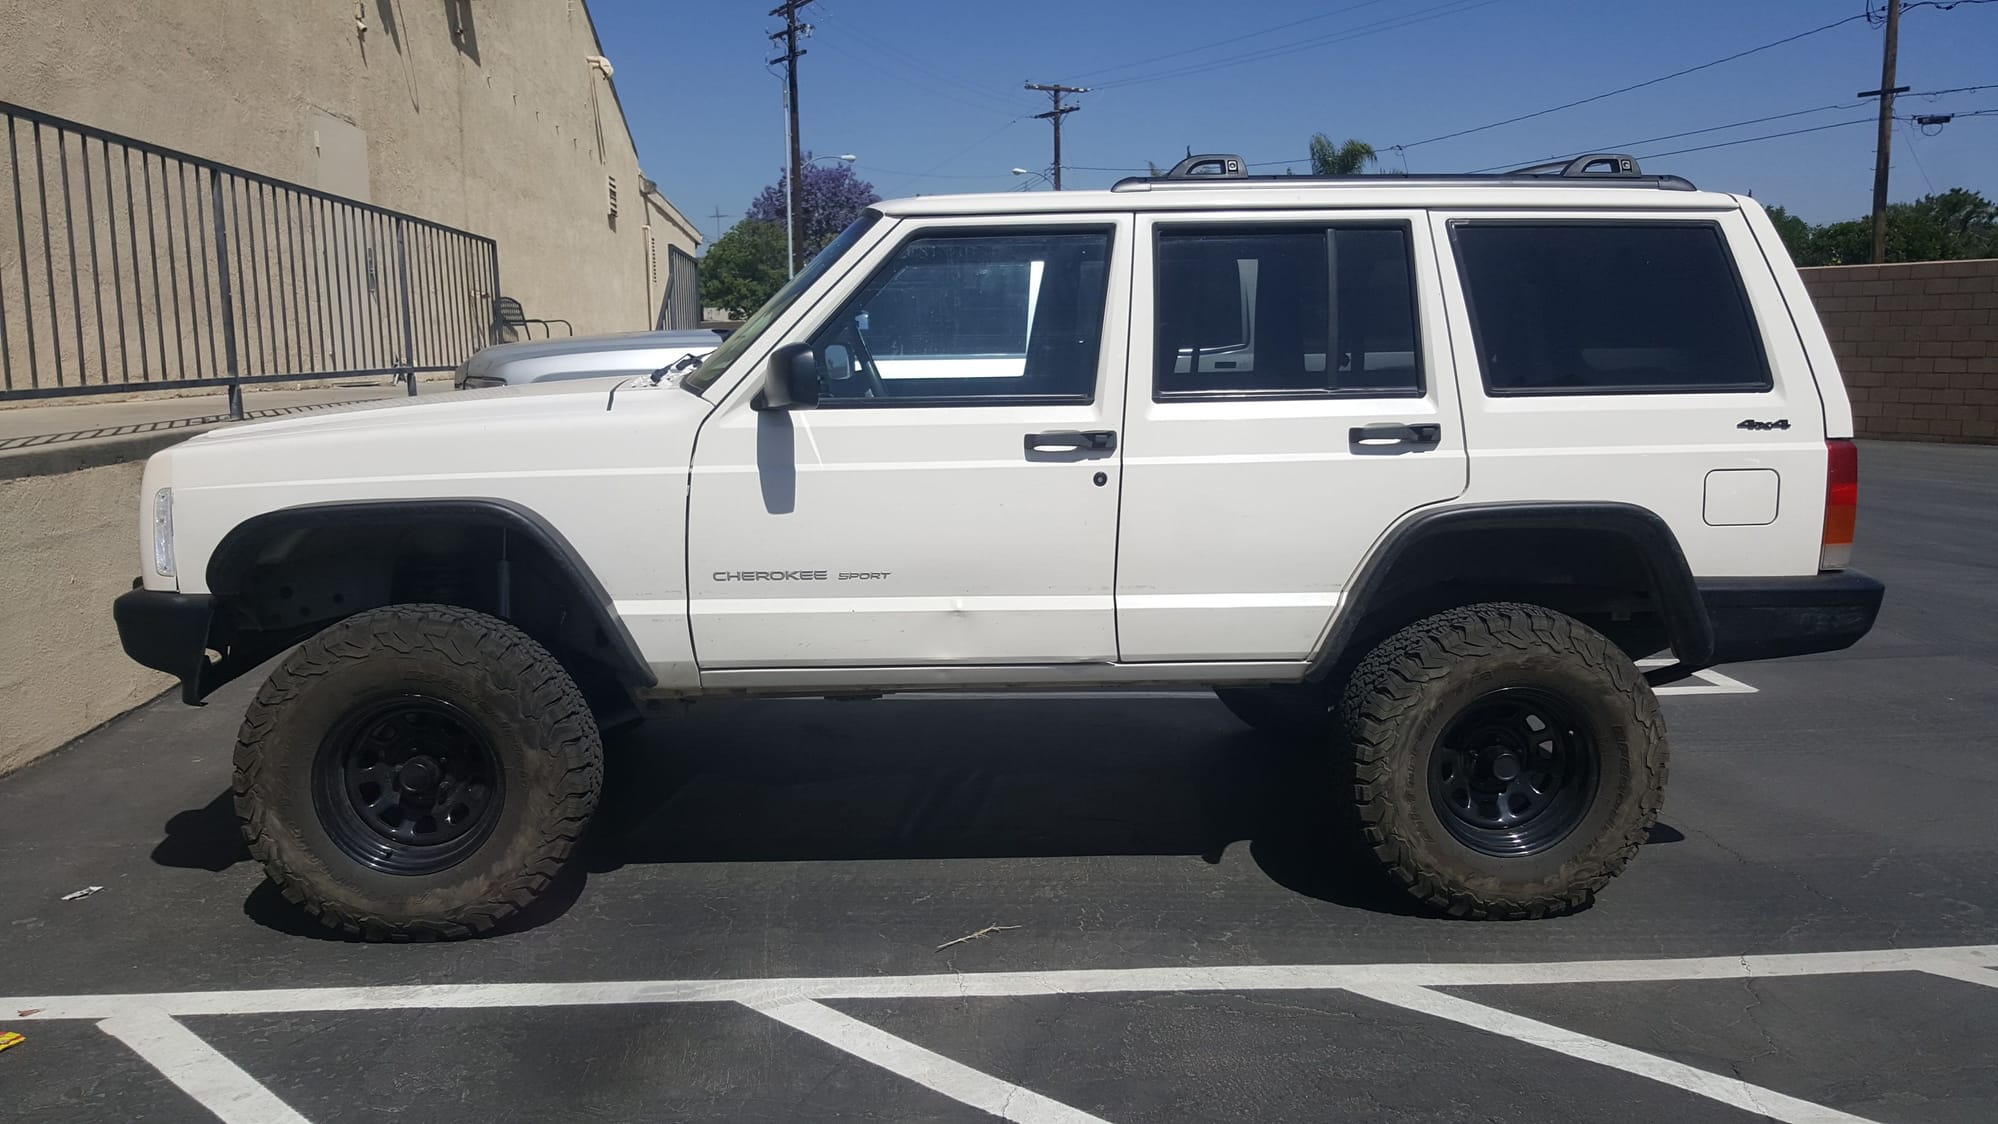 Jeep Cherokee with Flat Fender does 31" look to smal